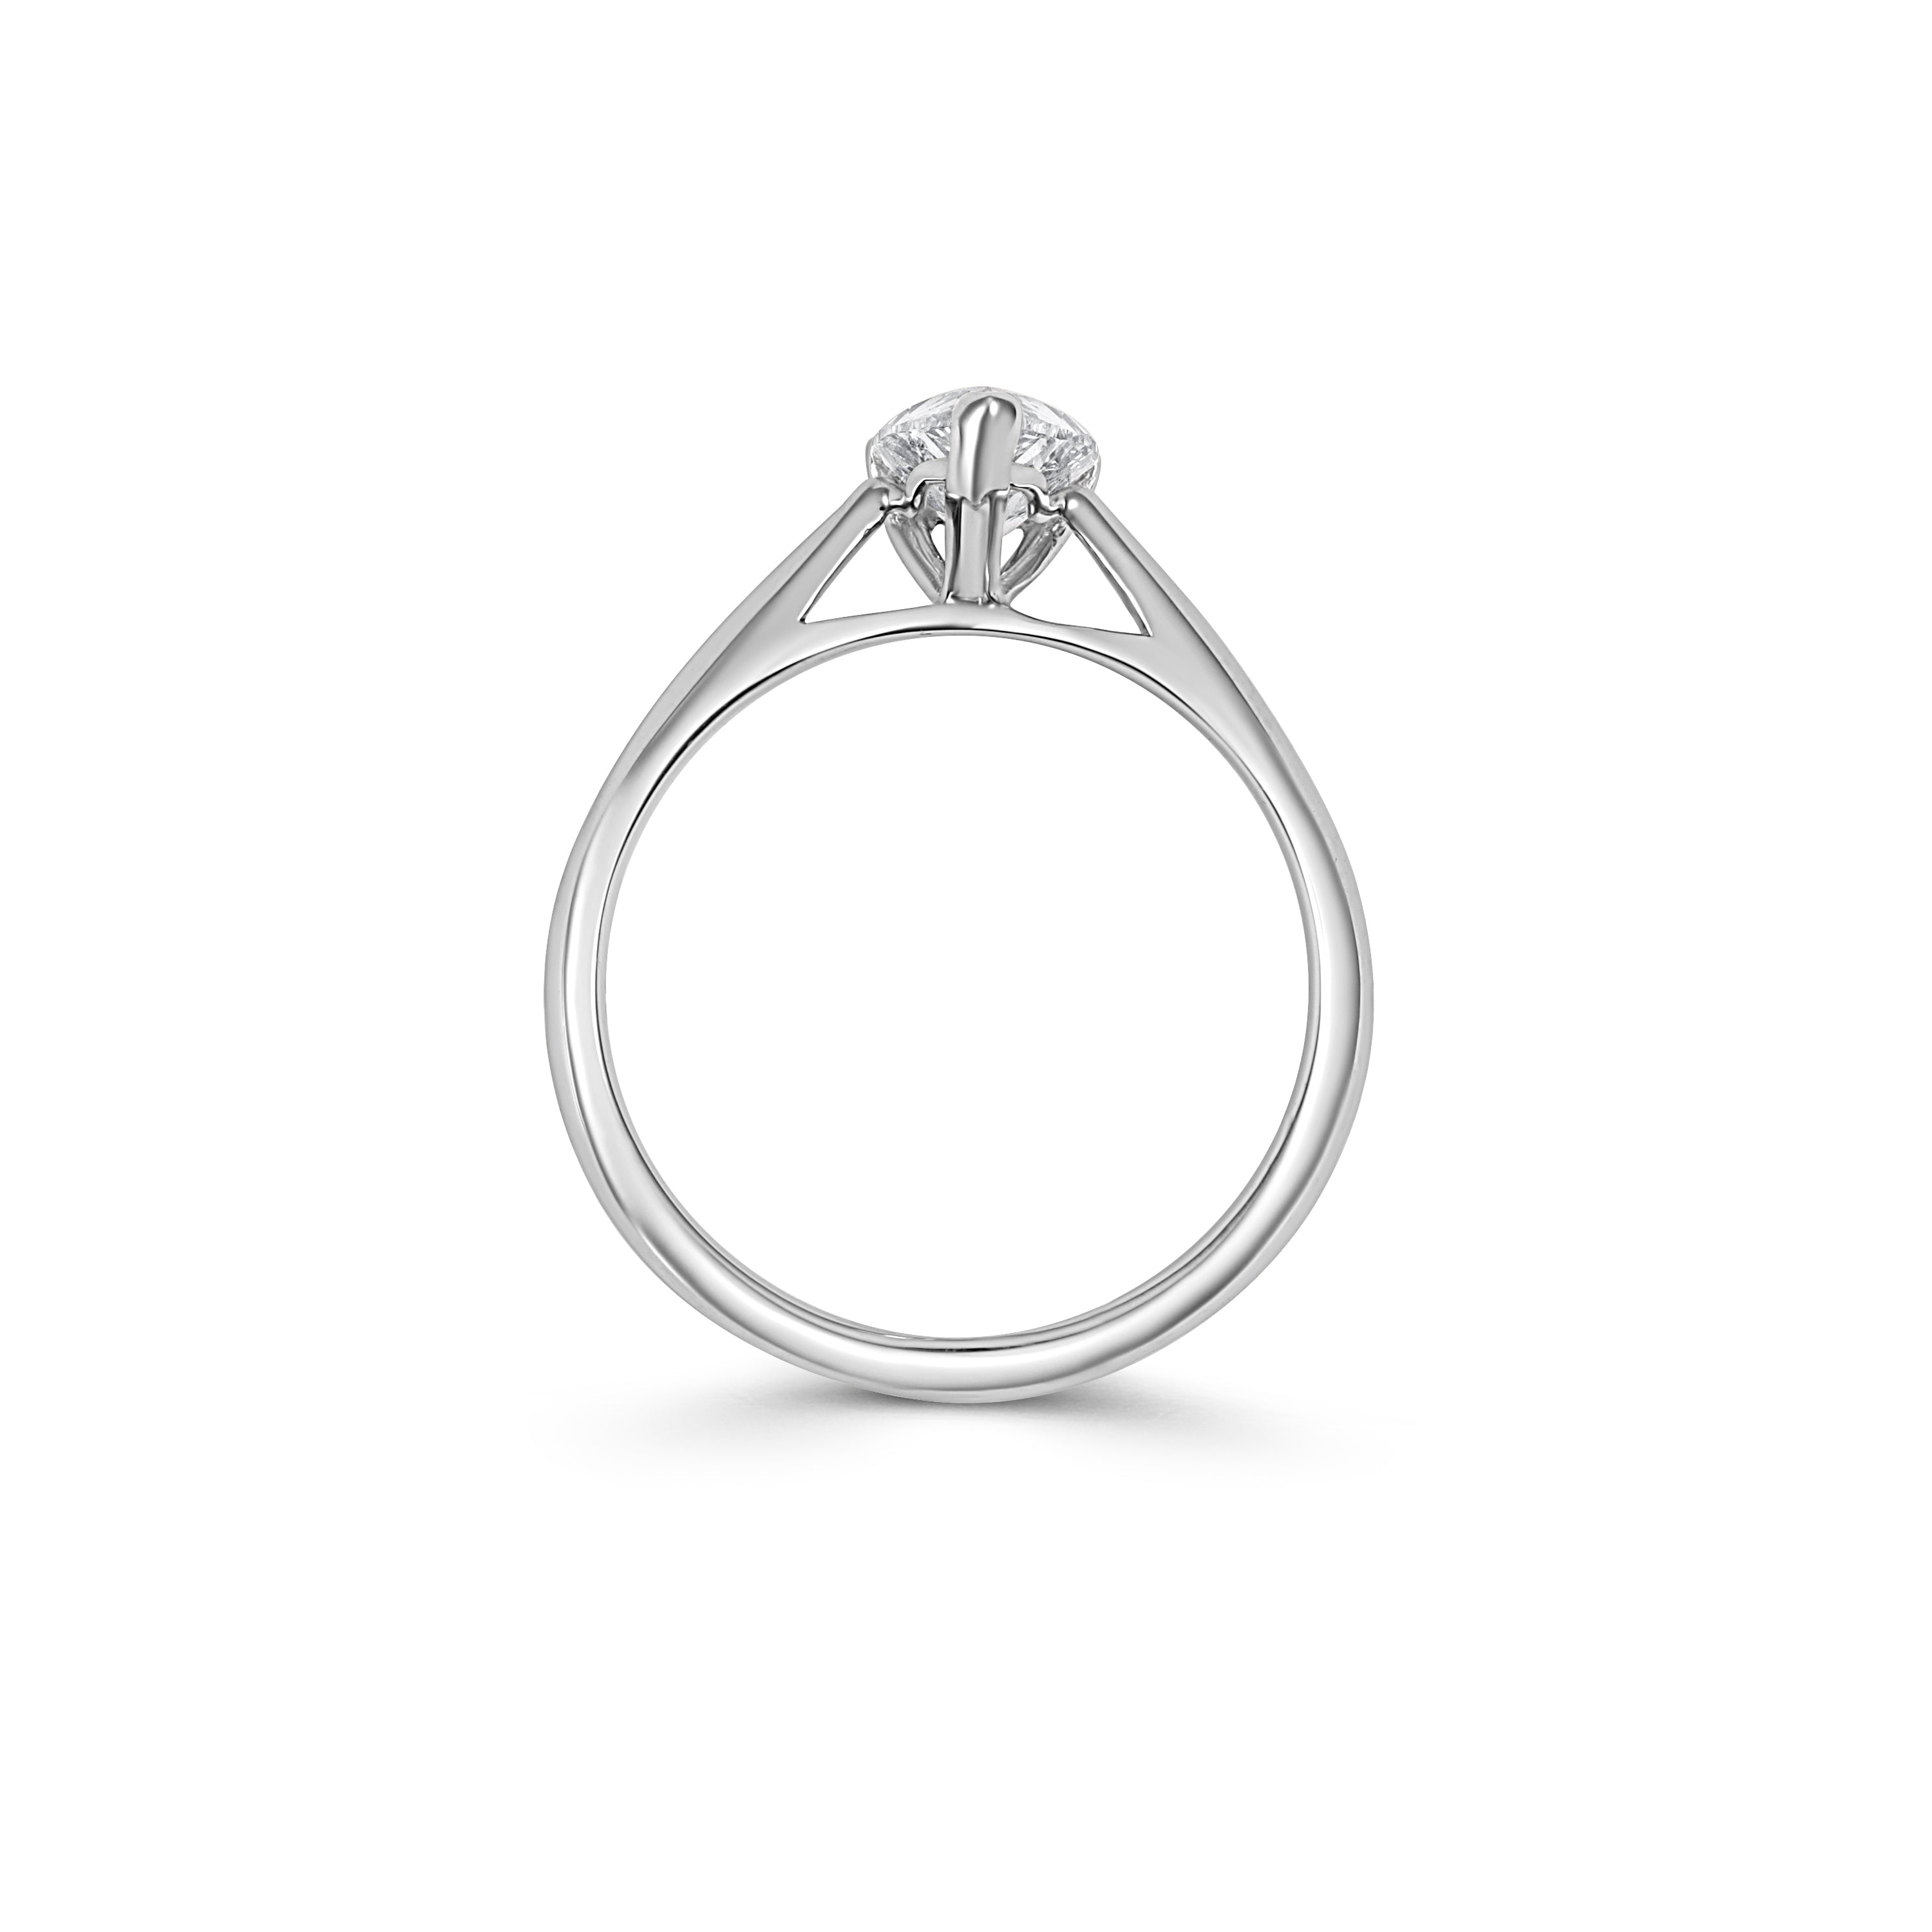 Platinum Pear Shaped 1ct Diamond Solitaire Ring